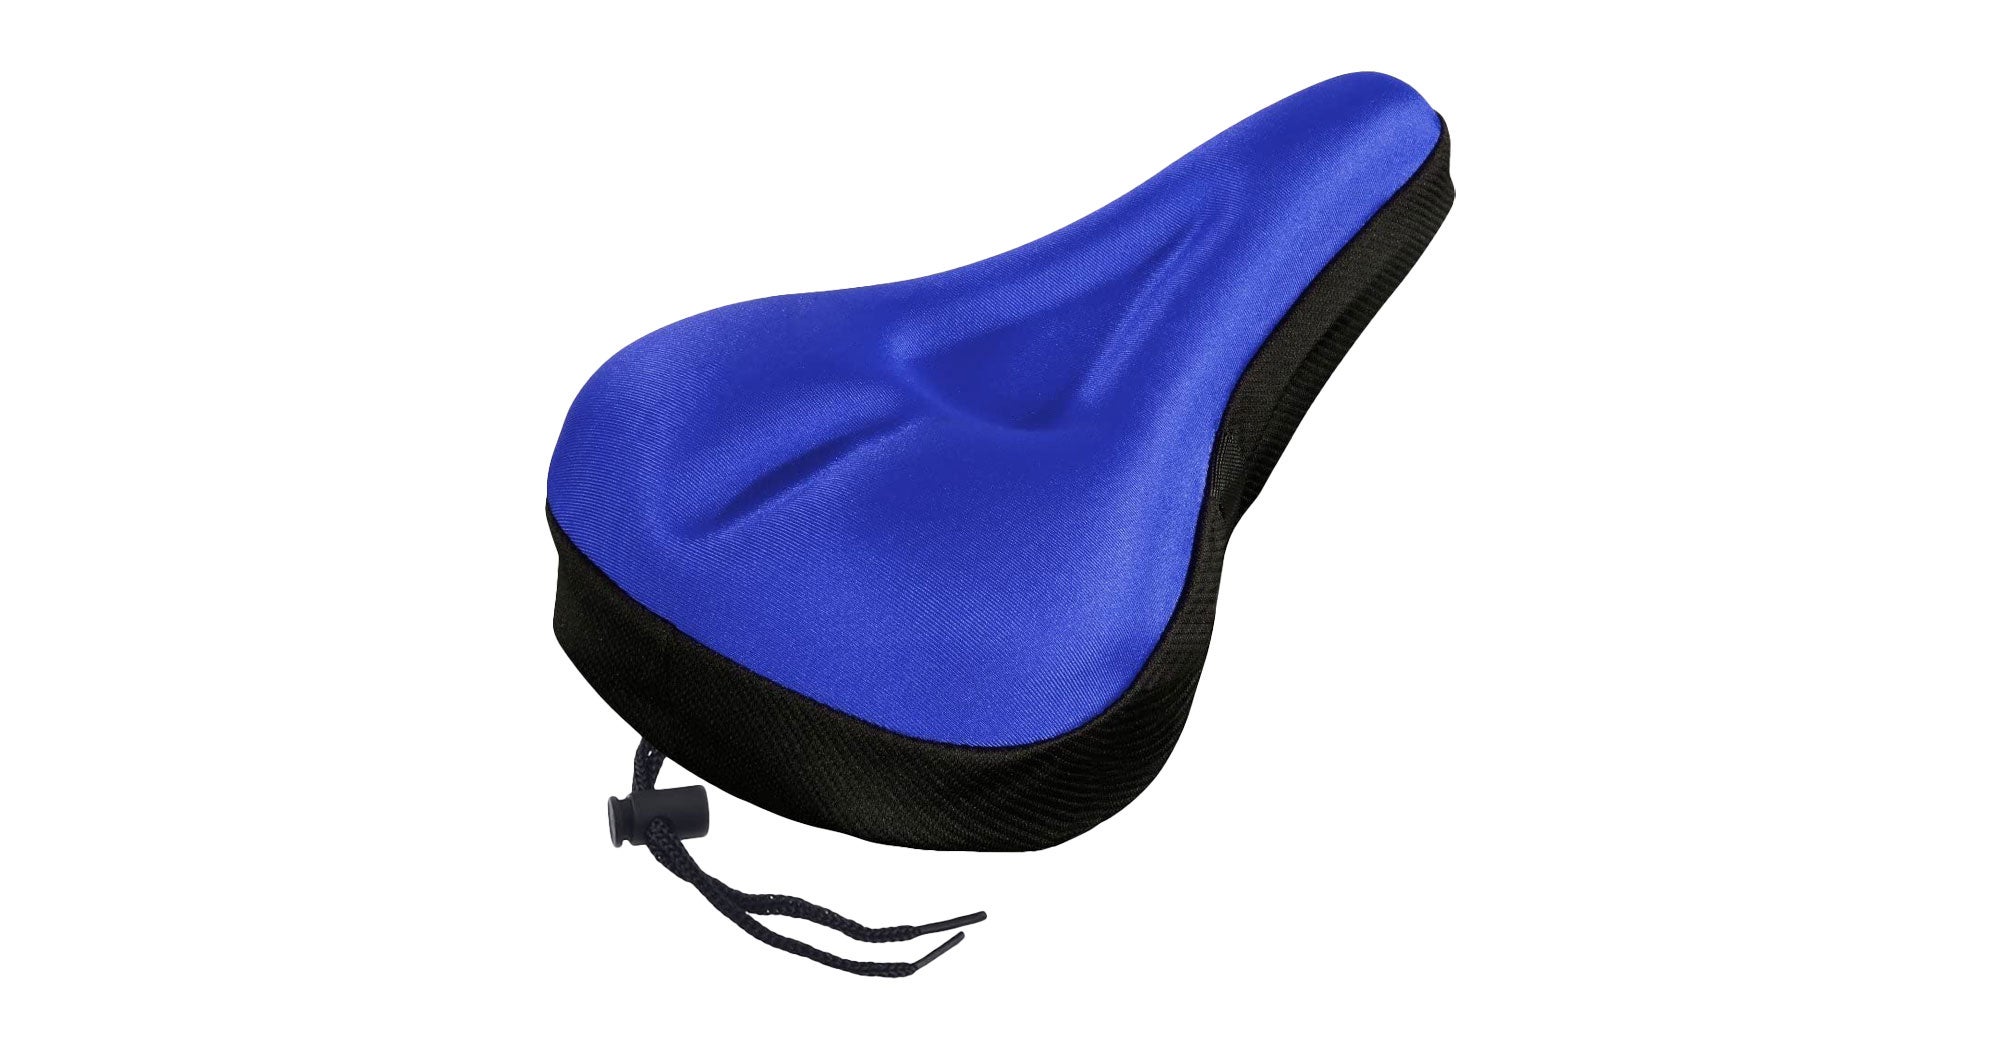 Bike Seat Cover & Cushion Reviews For Comfortable Ride